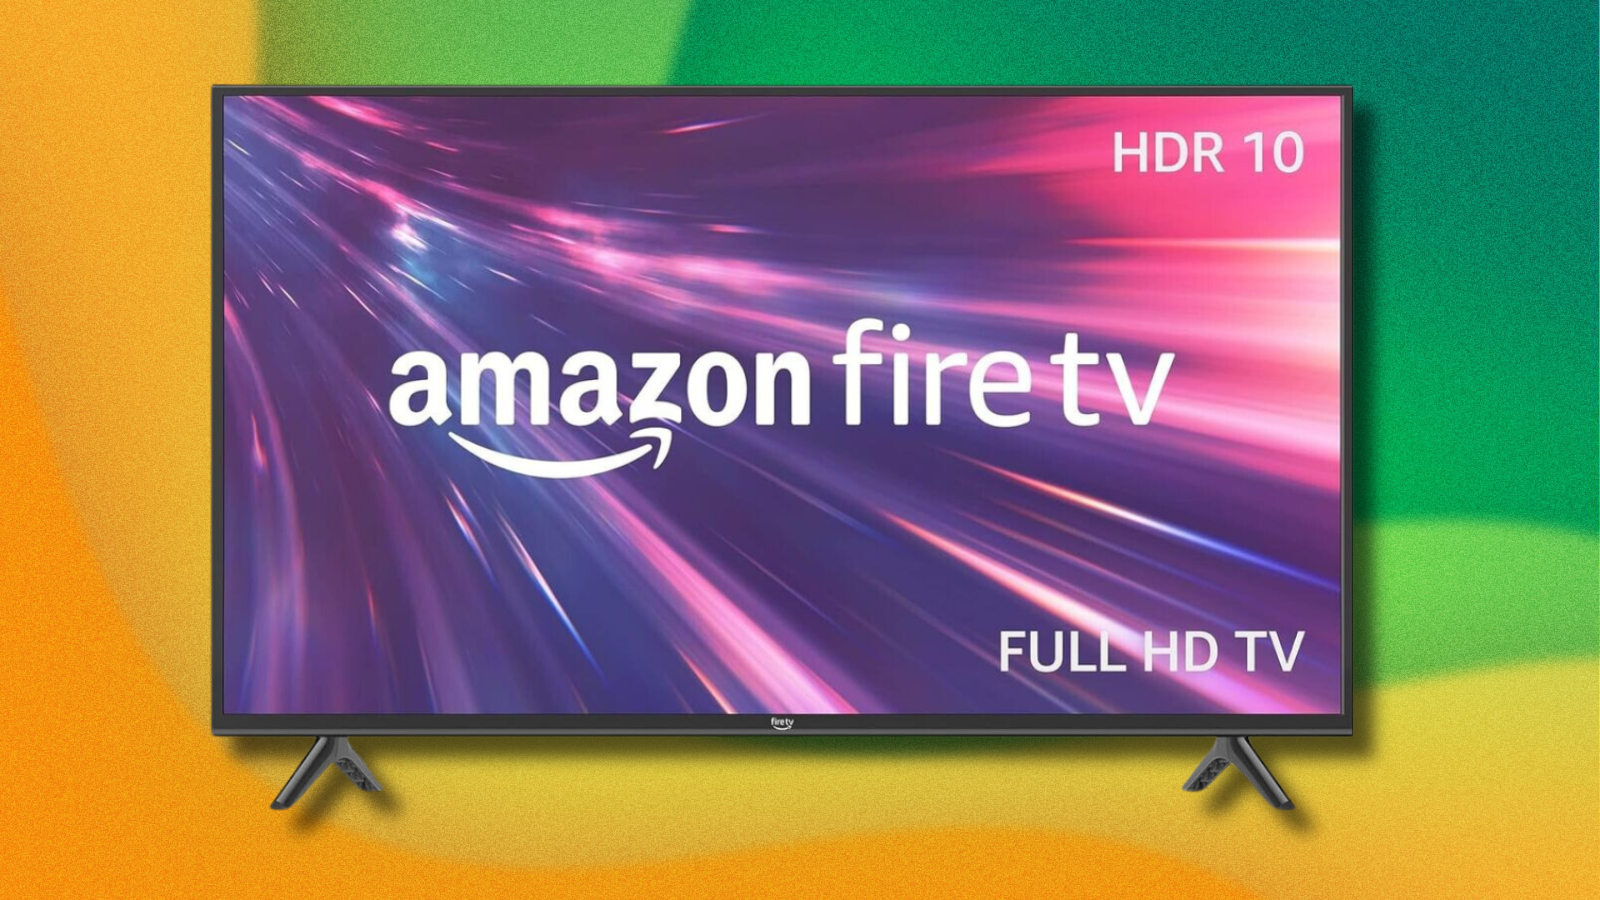 Amazon Fire TV on green and yellow abstract background